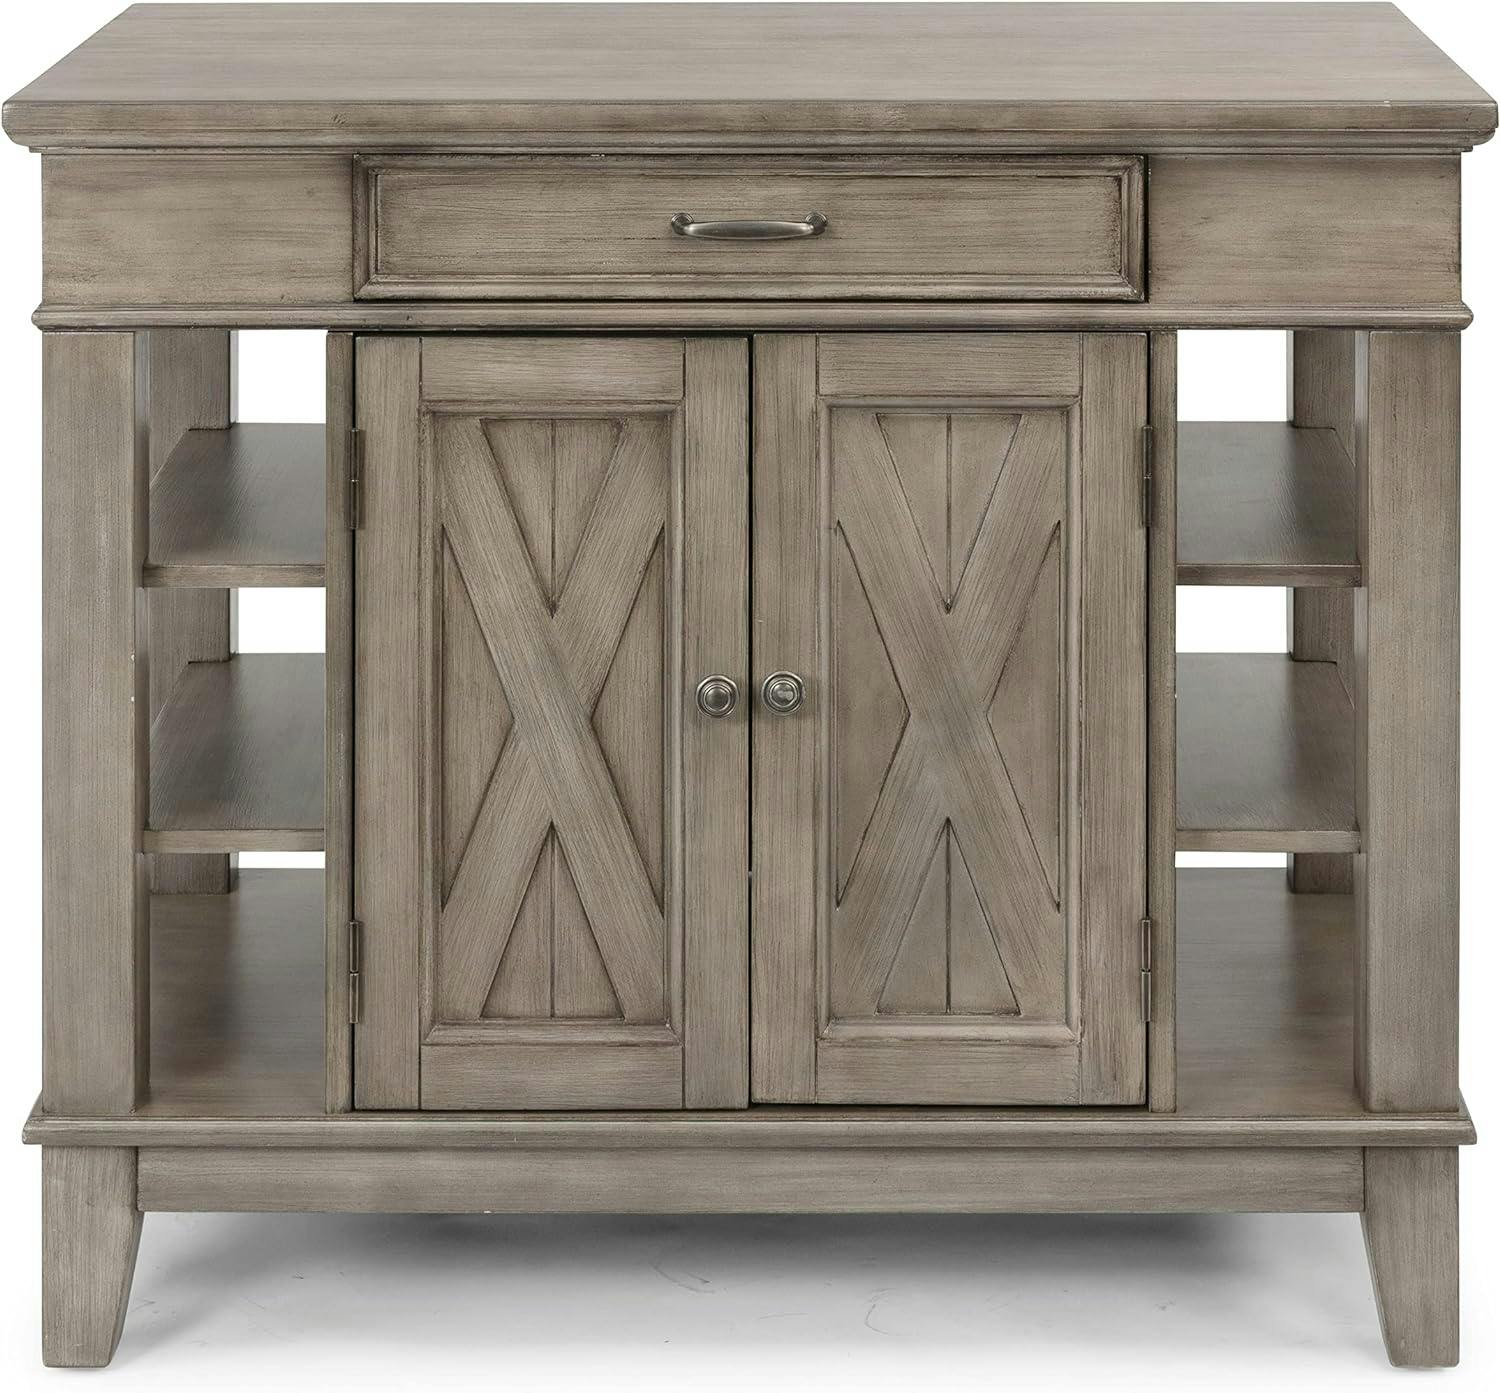 Rustic Multi-Gray Solid Wood Kitchen Island with Storage